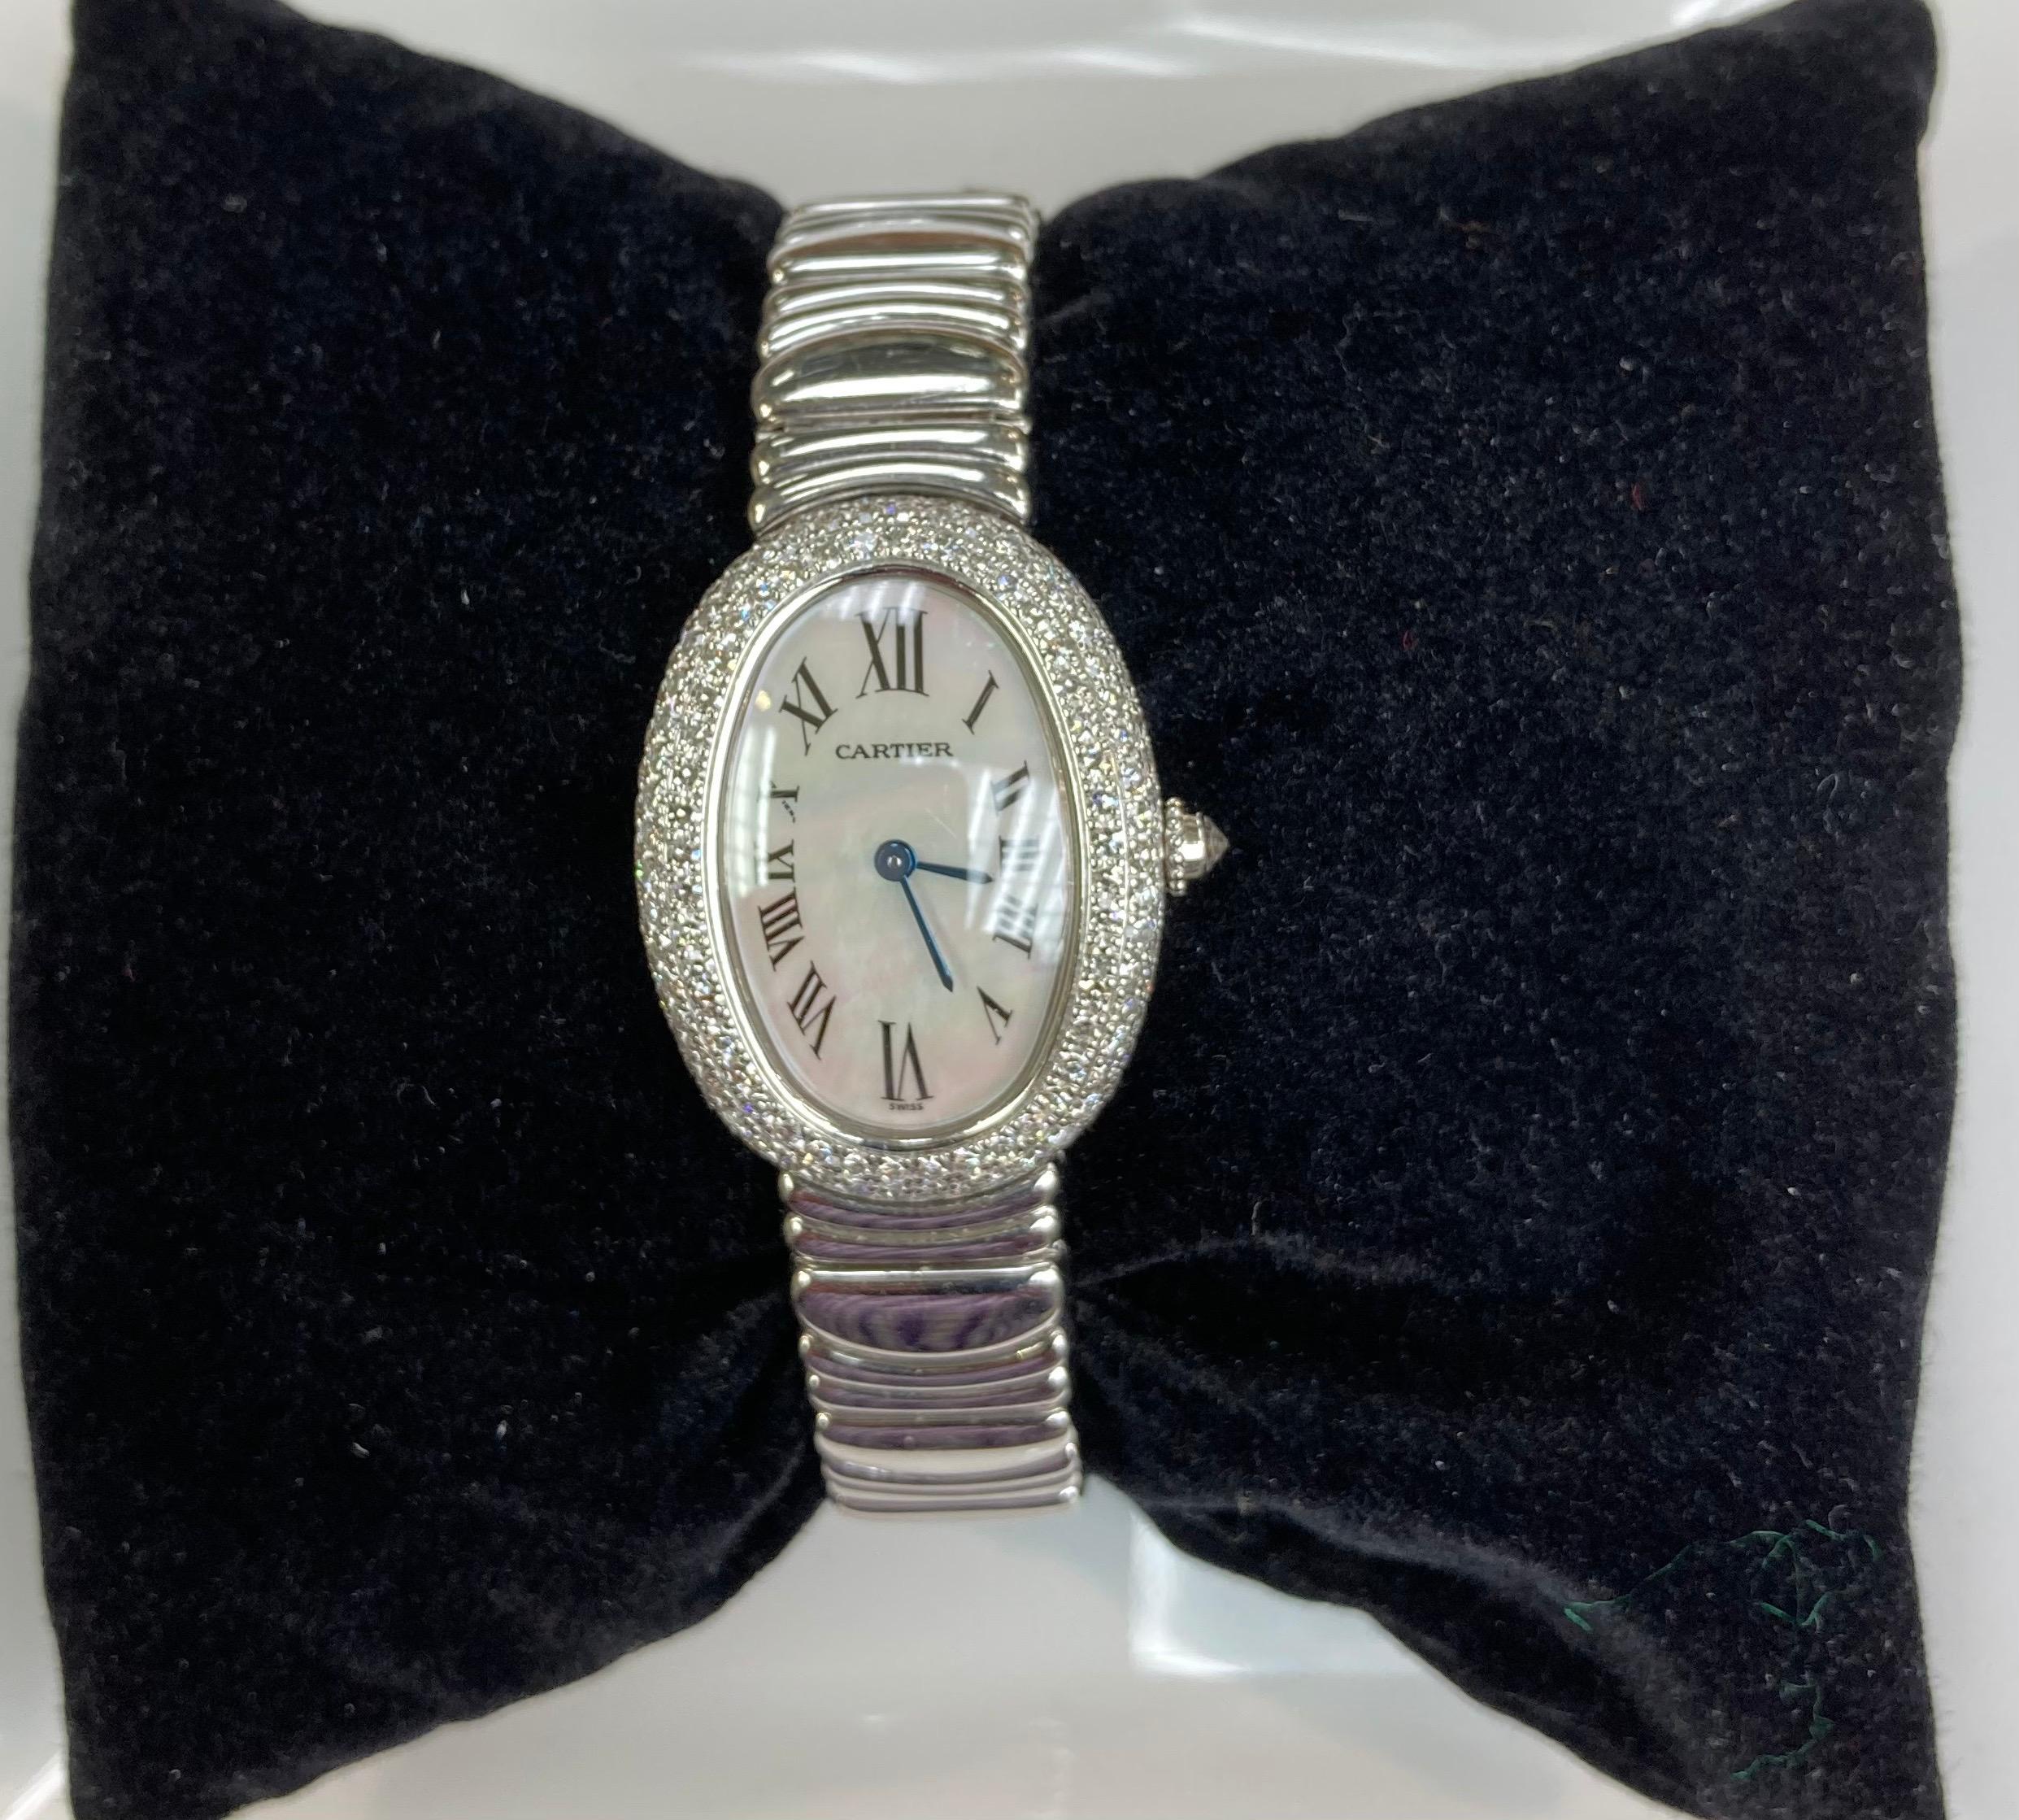 Cartier Baignoire diamond white gold wristwatch.  Ladies full size.  With three row diamond bezel.  Circa 2000

DIAL:  Mother of Pearl 

GOLD:  18k white gold

WEIGHT:  85.6 grams 

CASE:  31mm long by 22.5mm wide